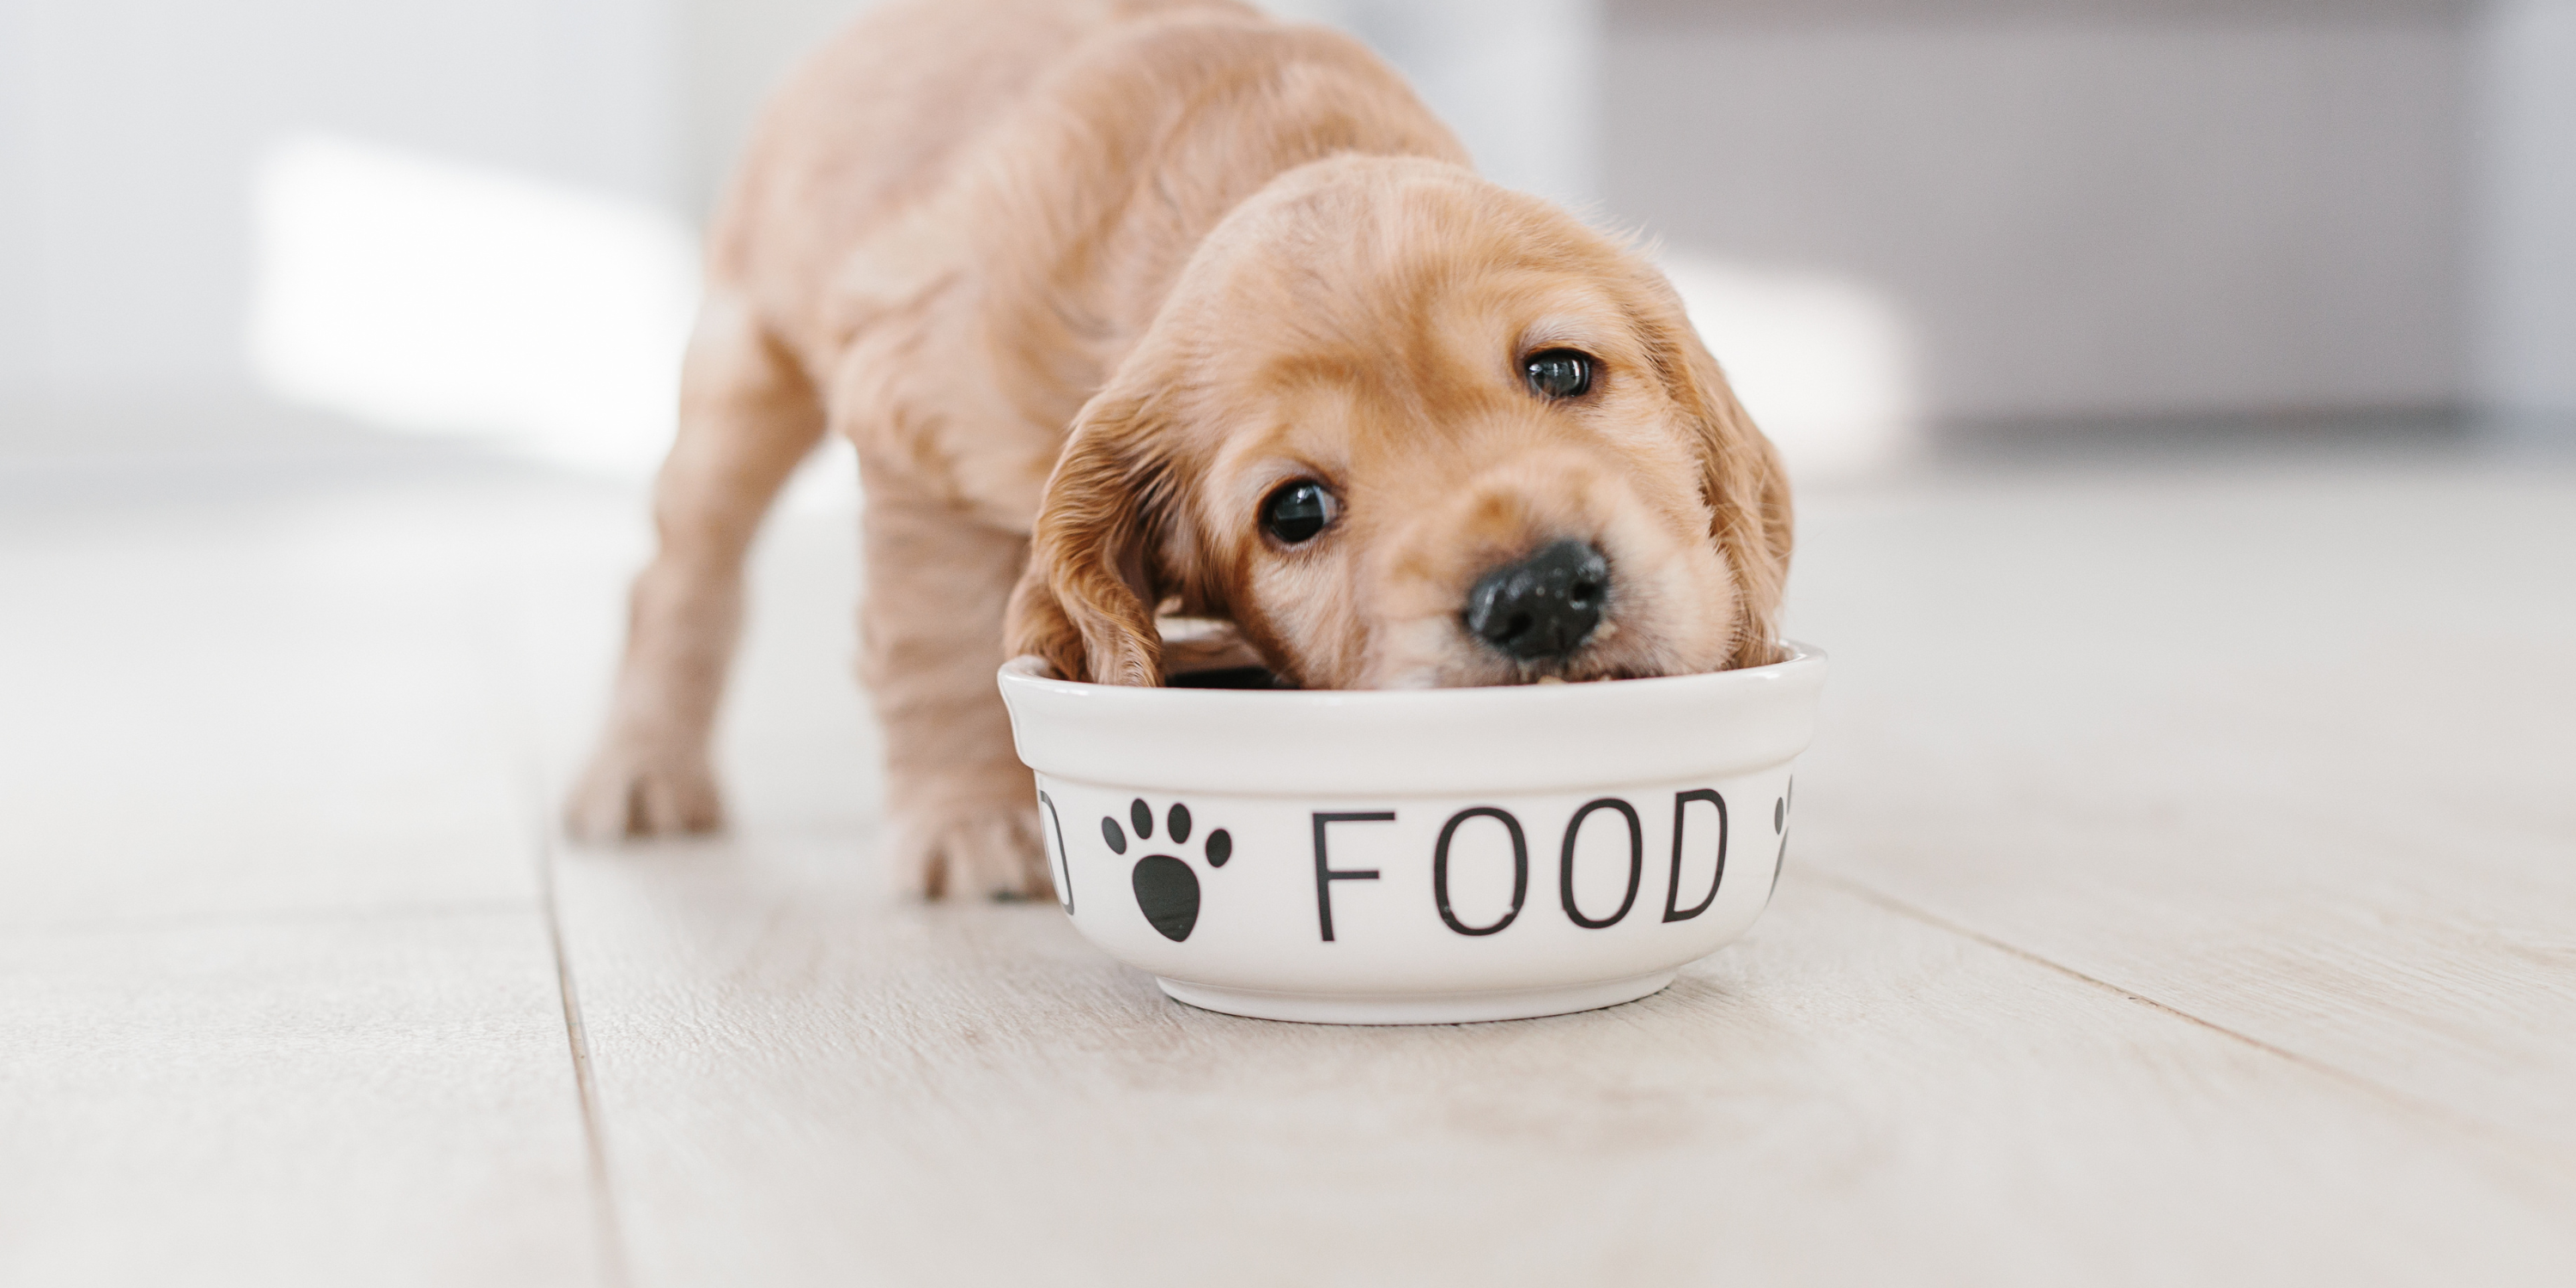 Transitioning your dog to new food